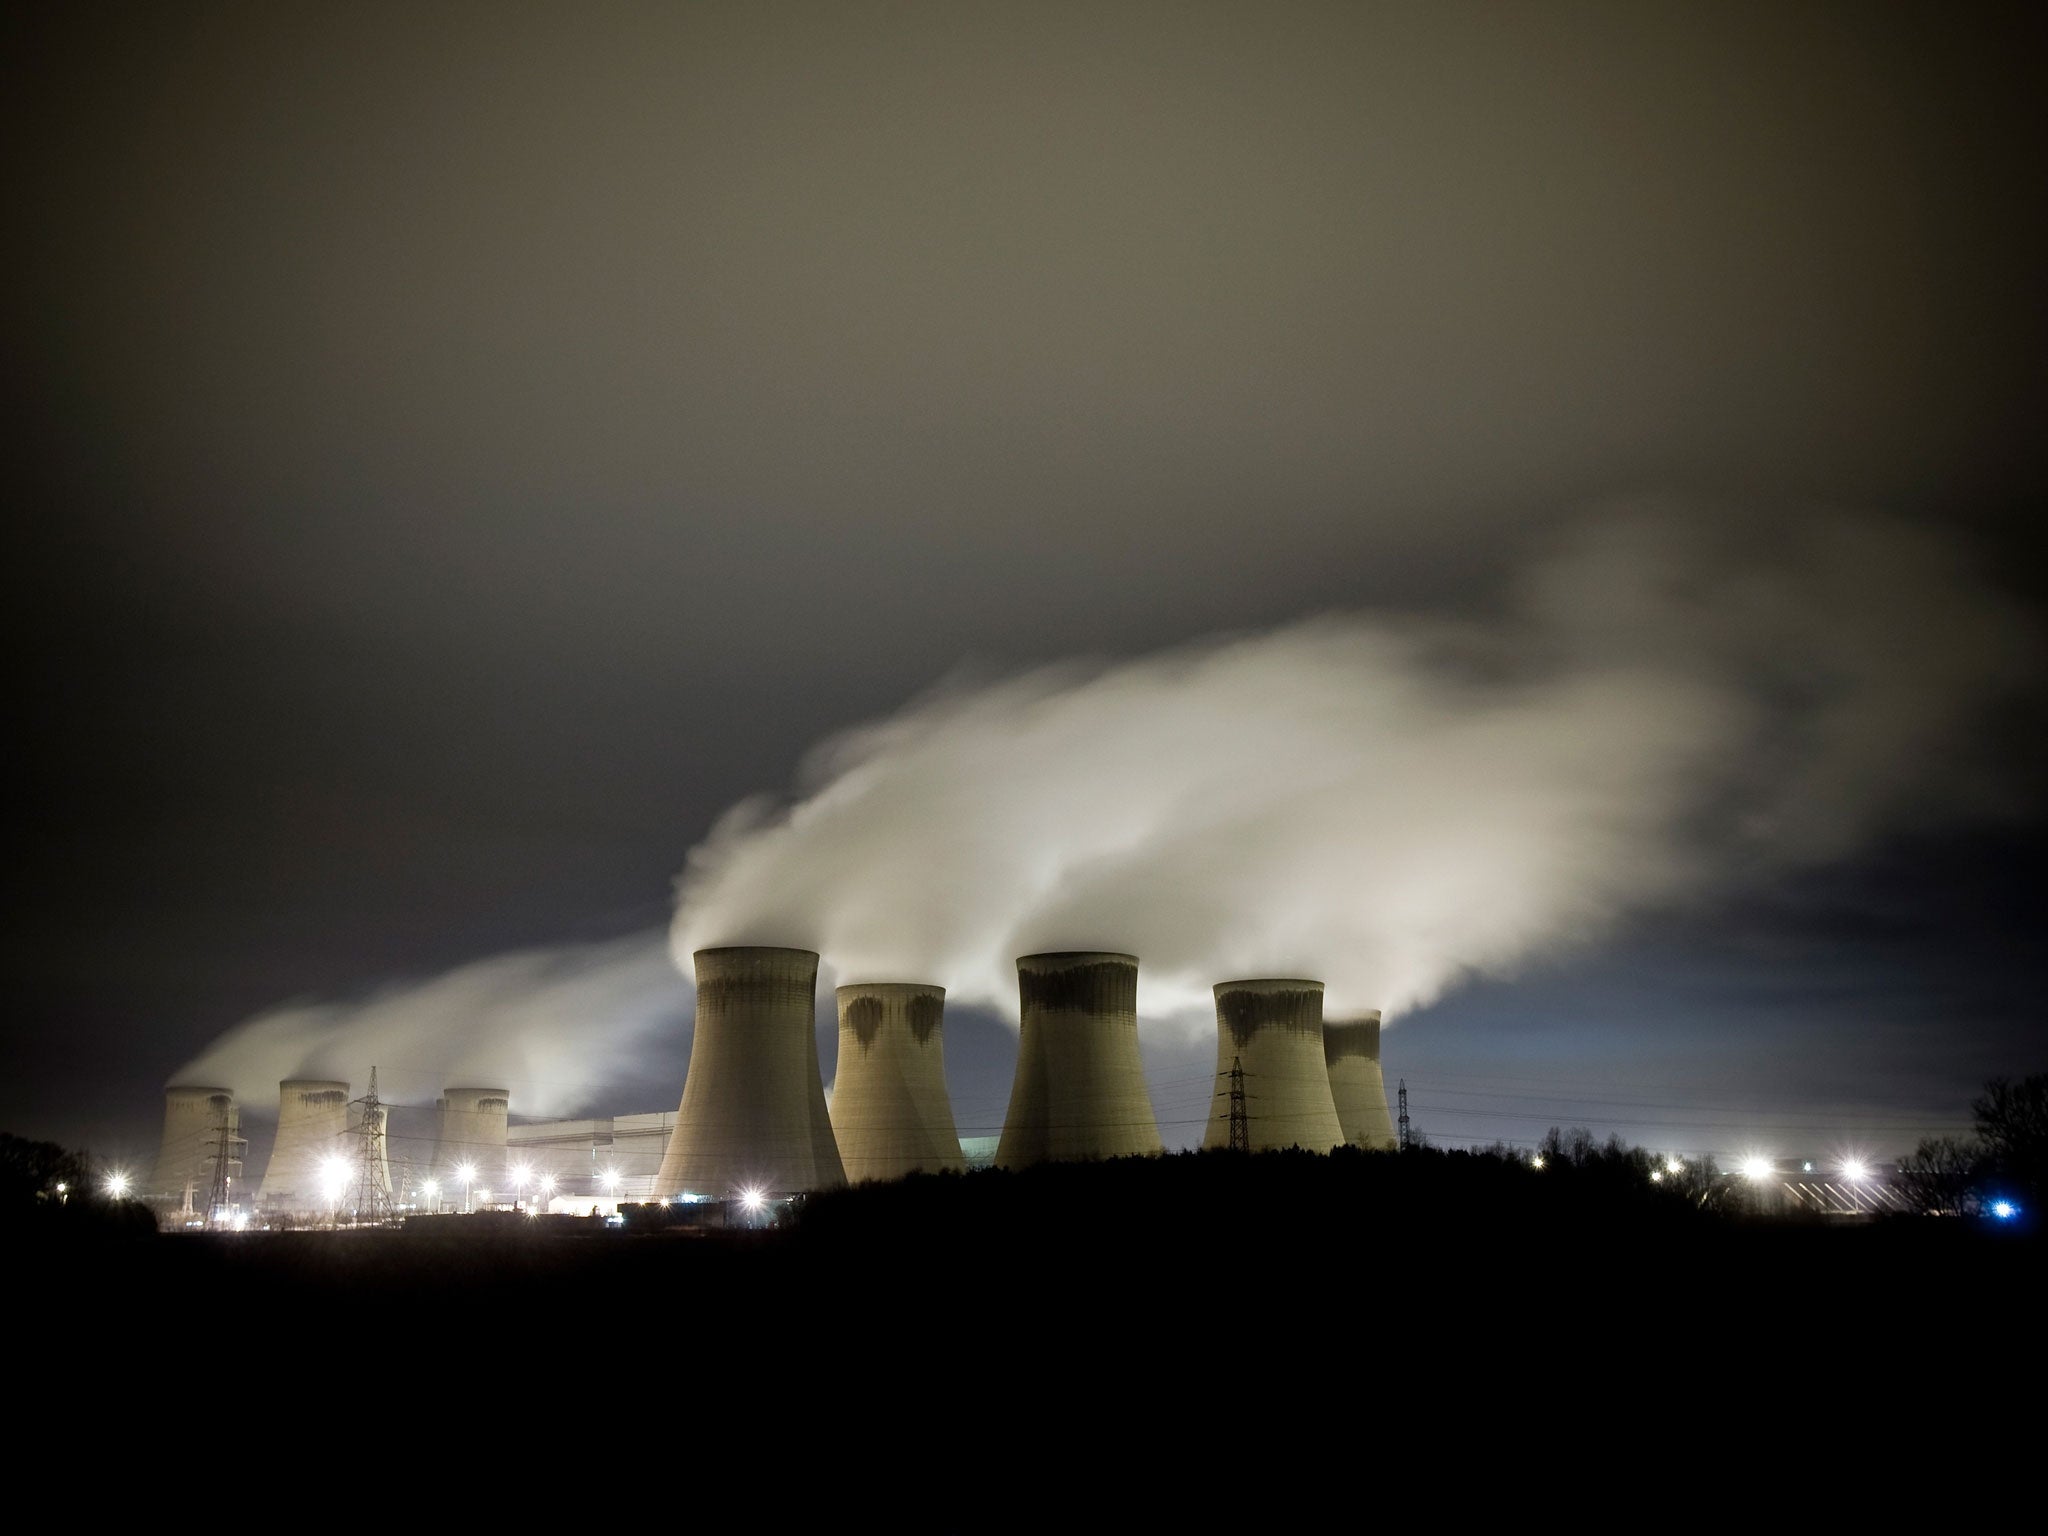 Britain’s dirtiest coal power stations are to be allowed to bid for hundreds of millions of pounds’ worth of subsidies that could allow them to stay open well into the 2020s